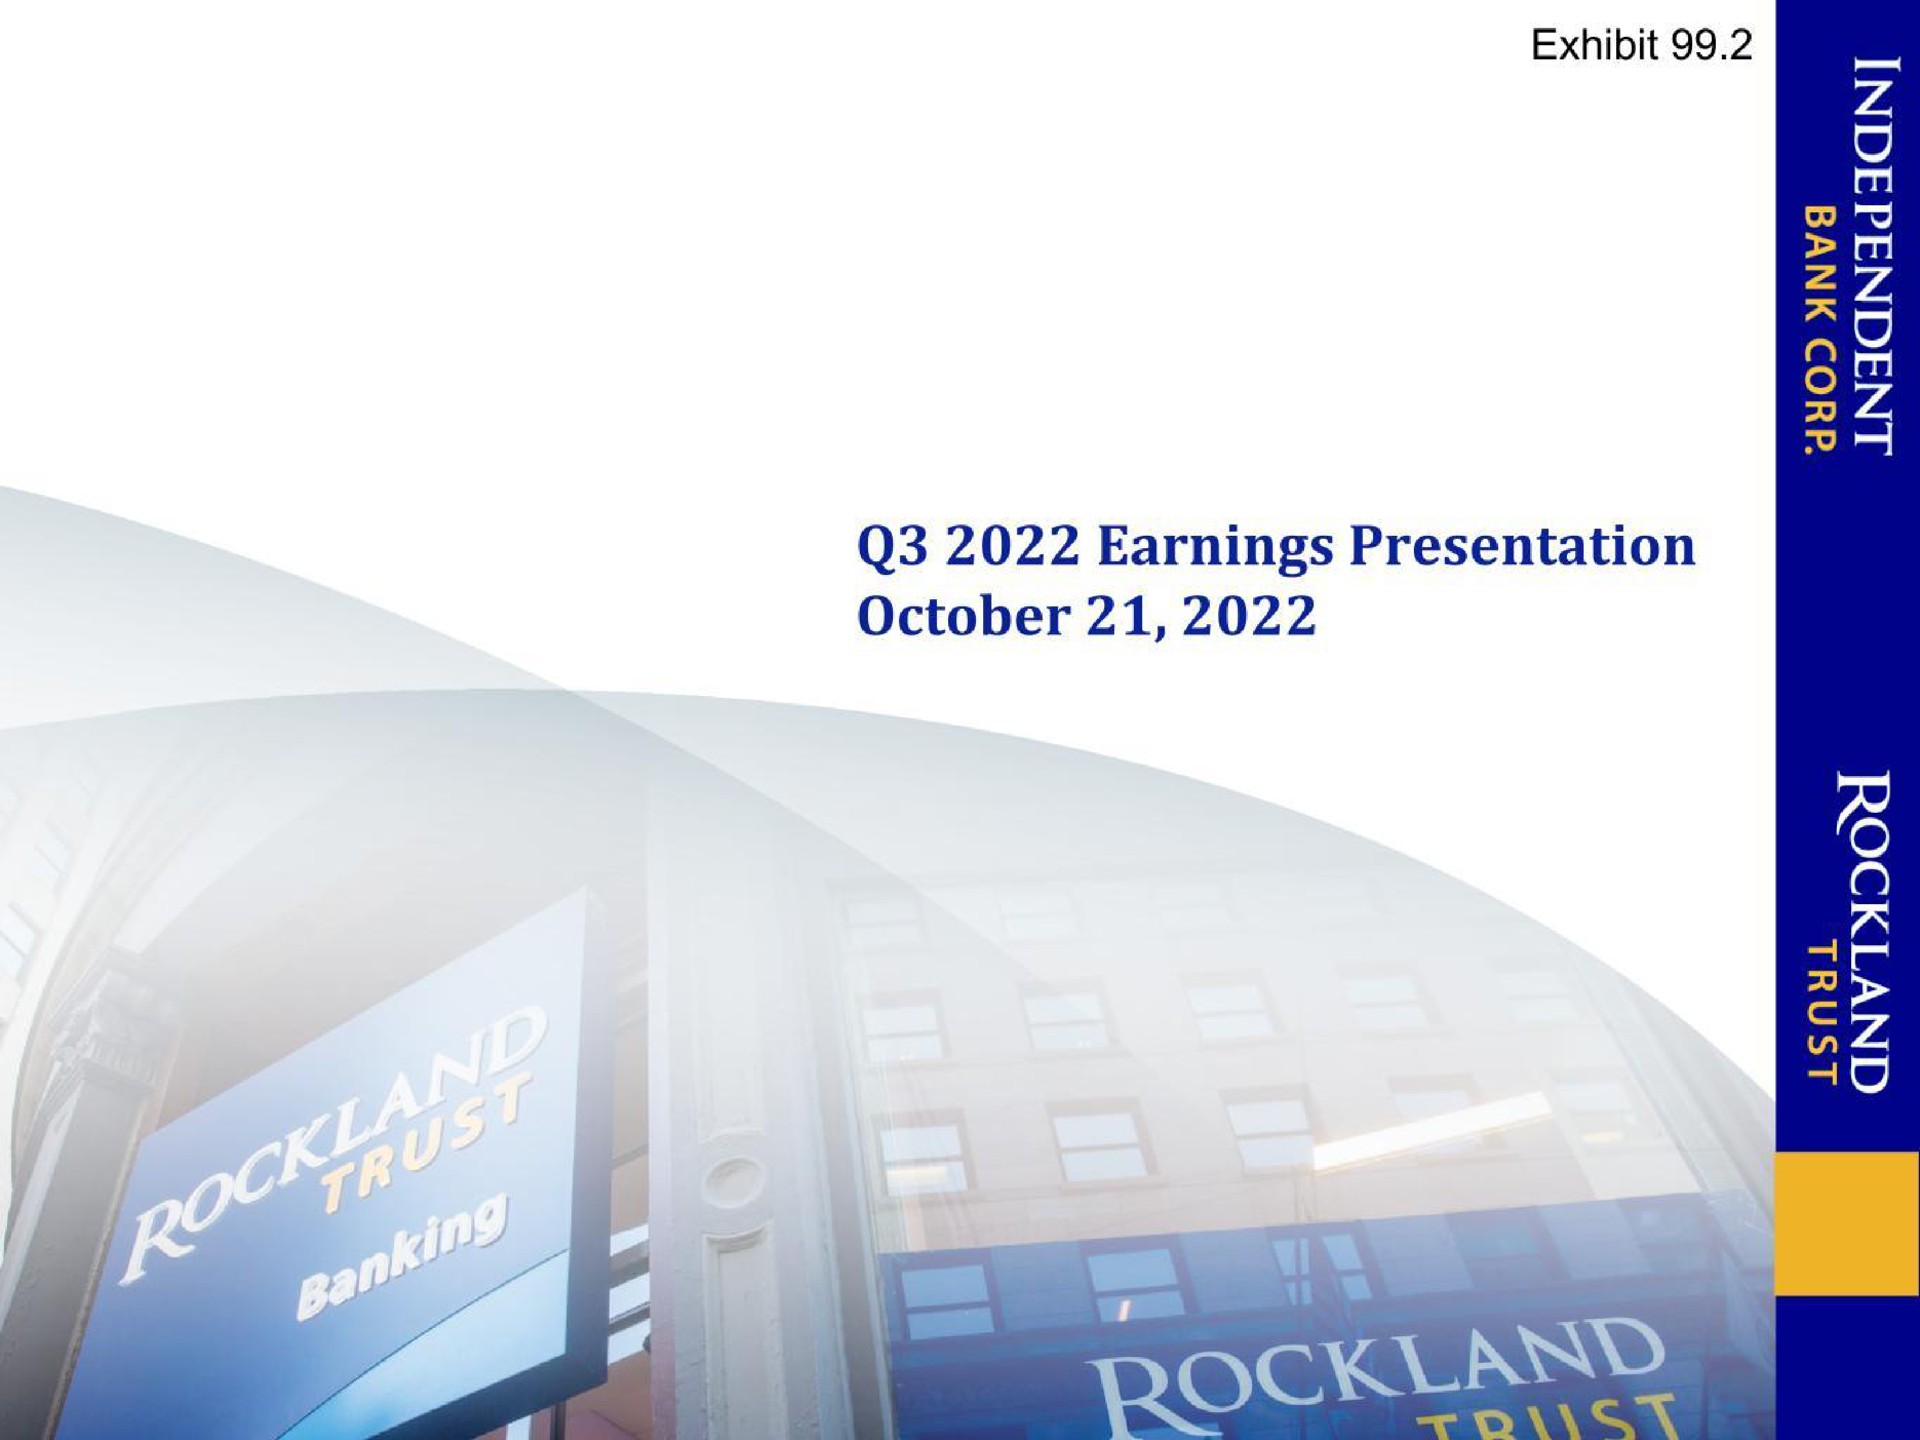 exhibit earnings presentation | Independent Bank Corp